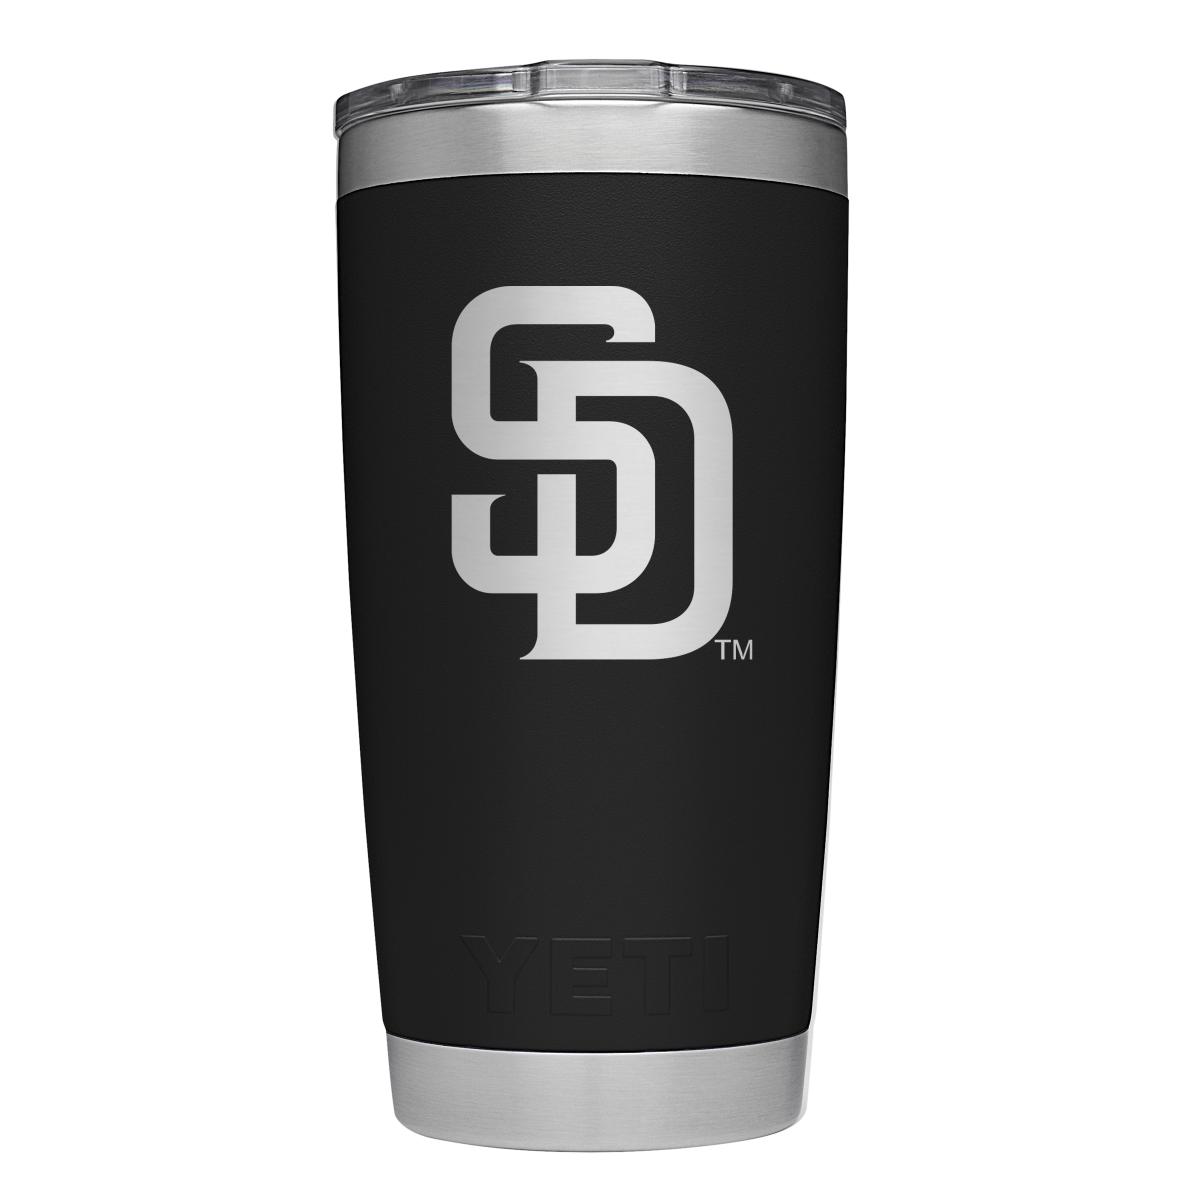 San Diego Padres YETI Coolers and Drinkware, where to buy Padres